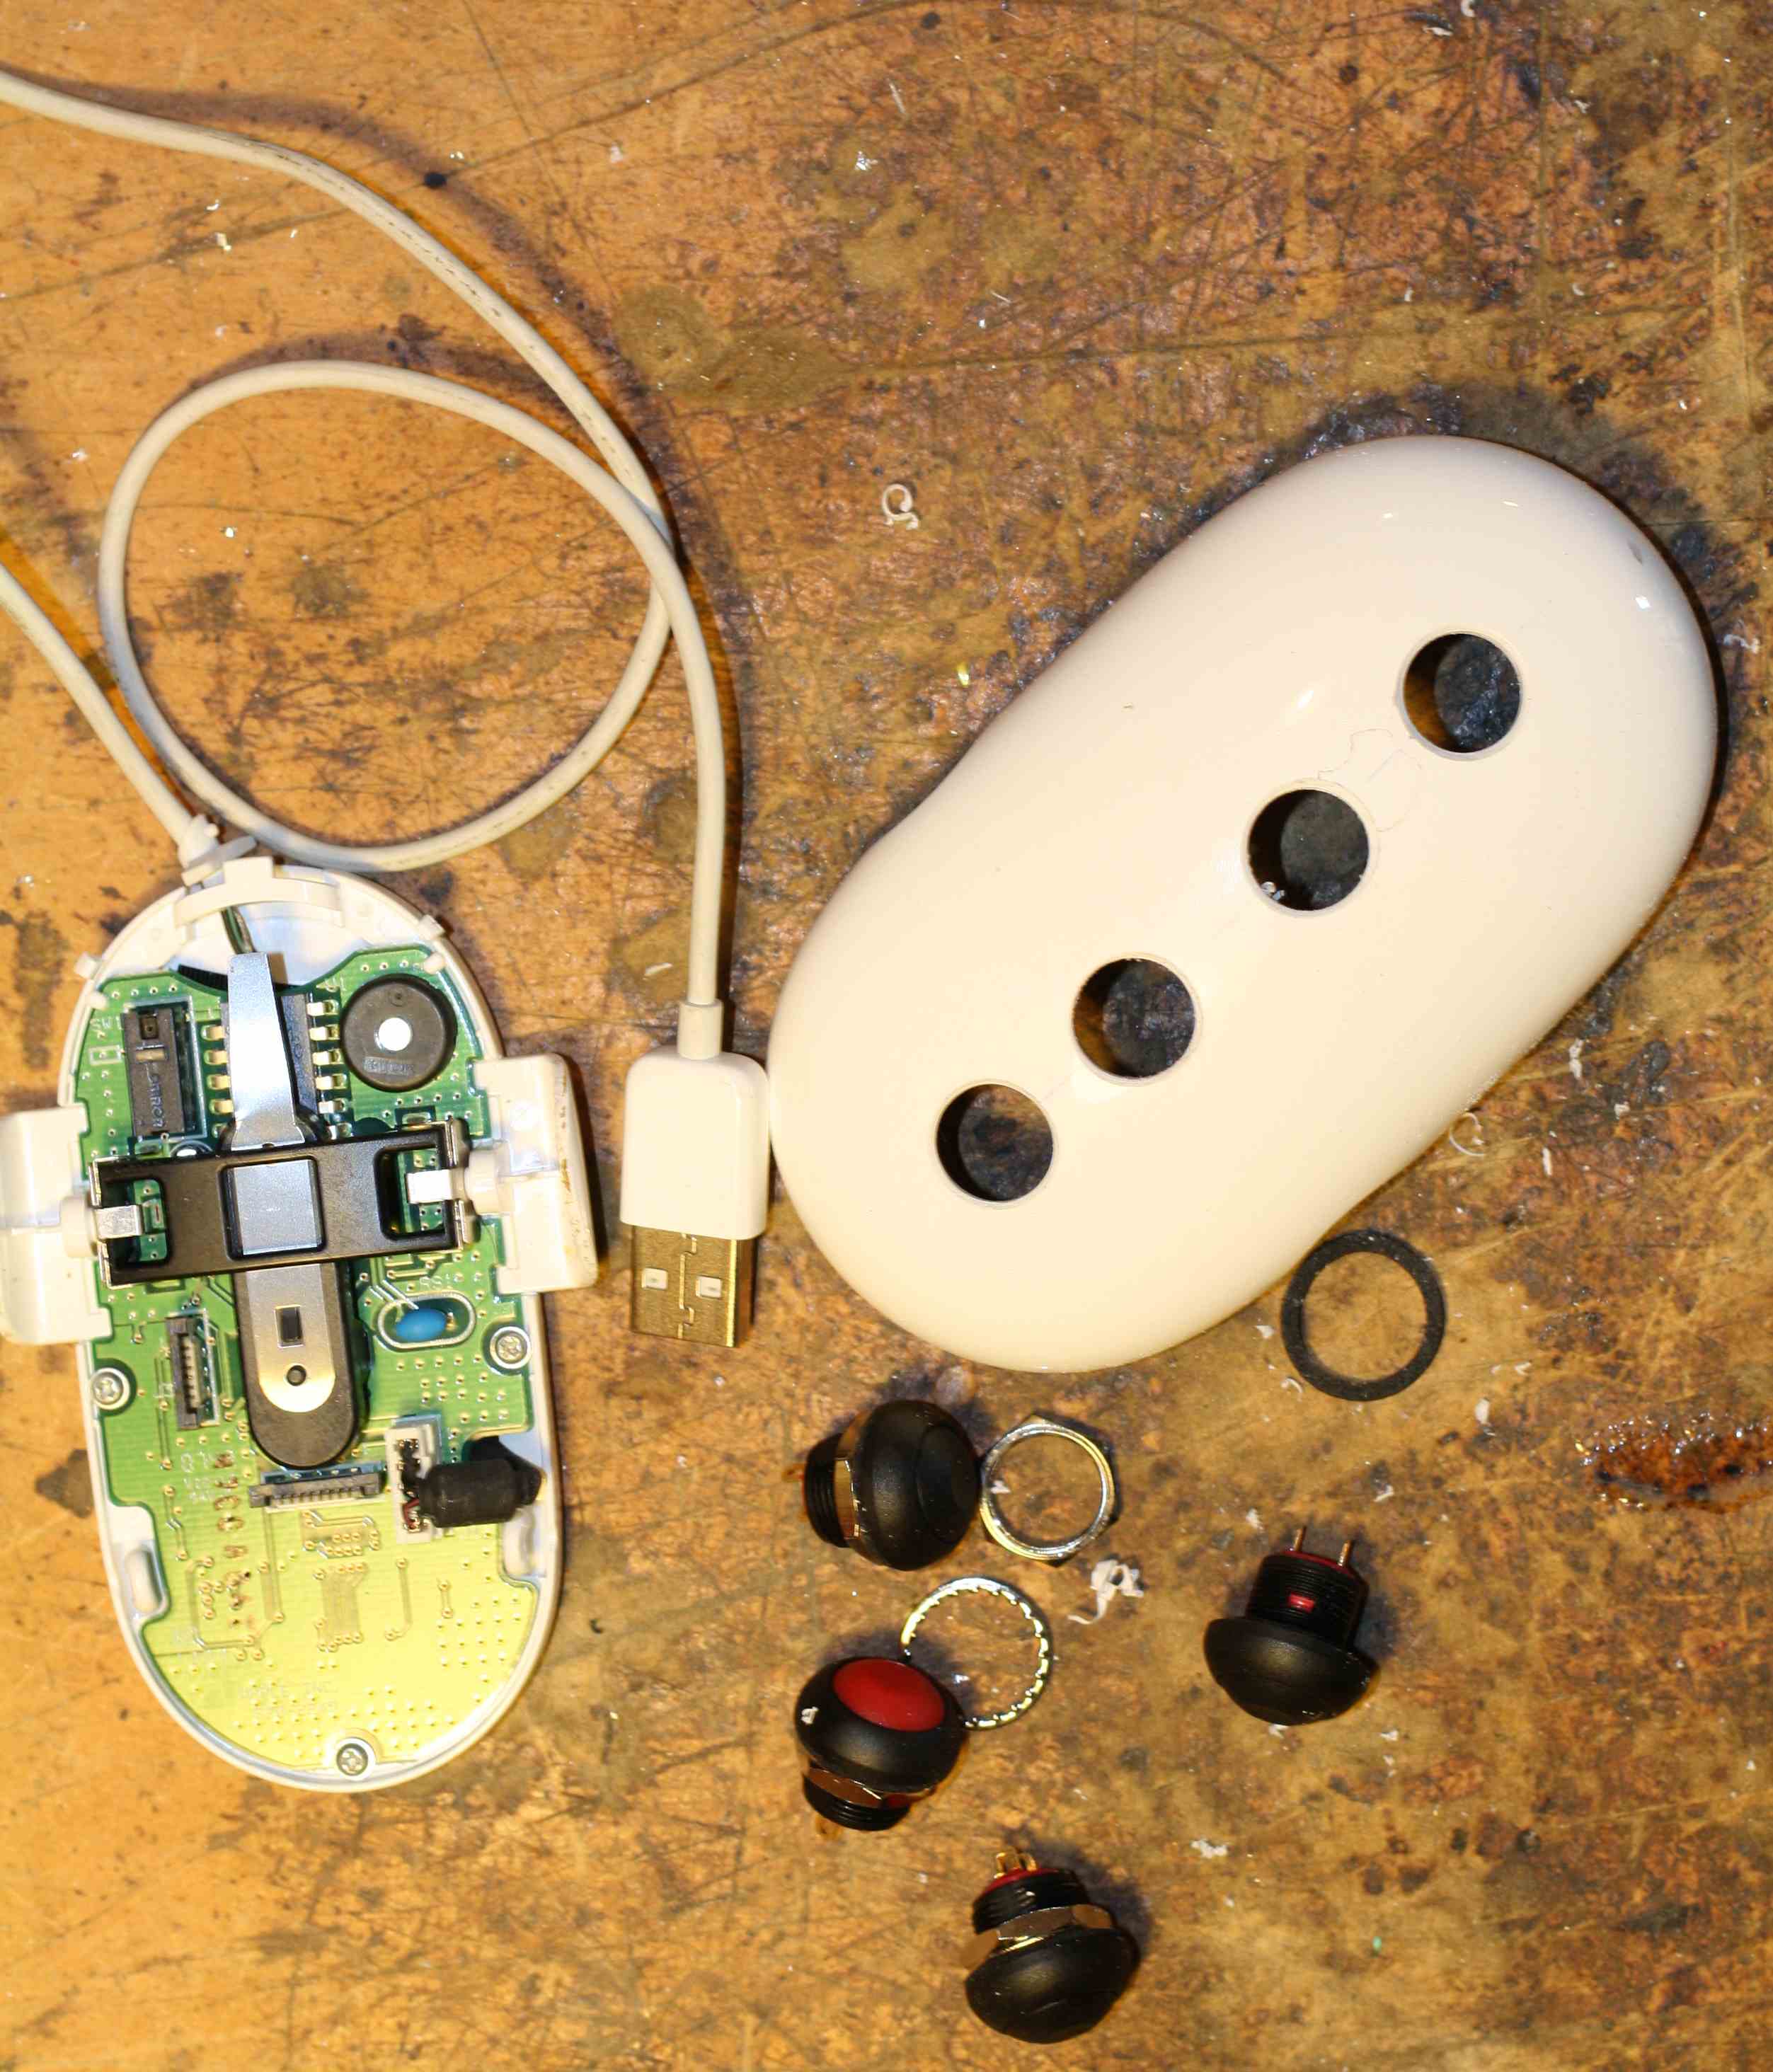 The Apple mouse disassembled with switch holes drilled in upper shell. Lower shell still has circuit board and USB cable attached (All to be removed)